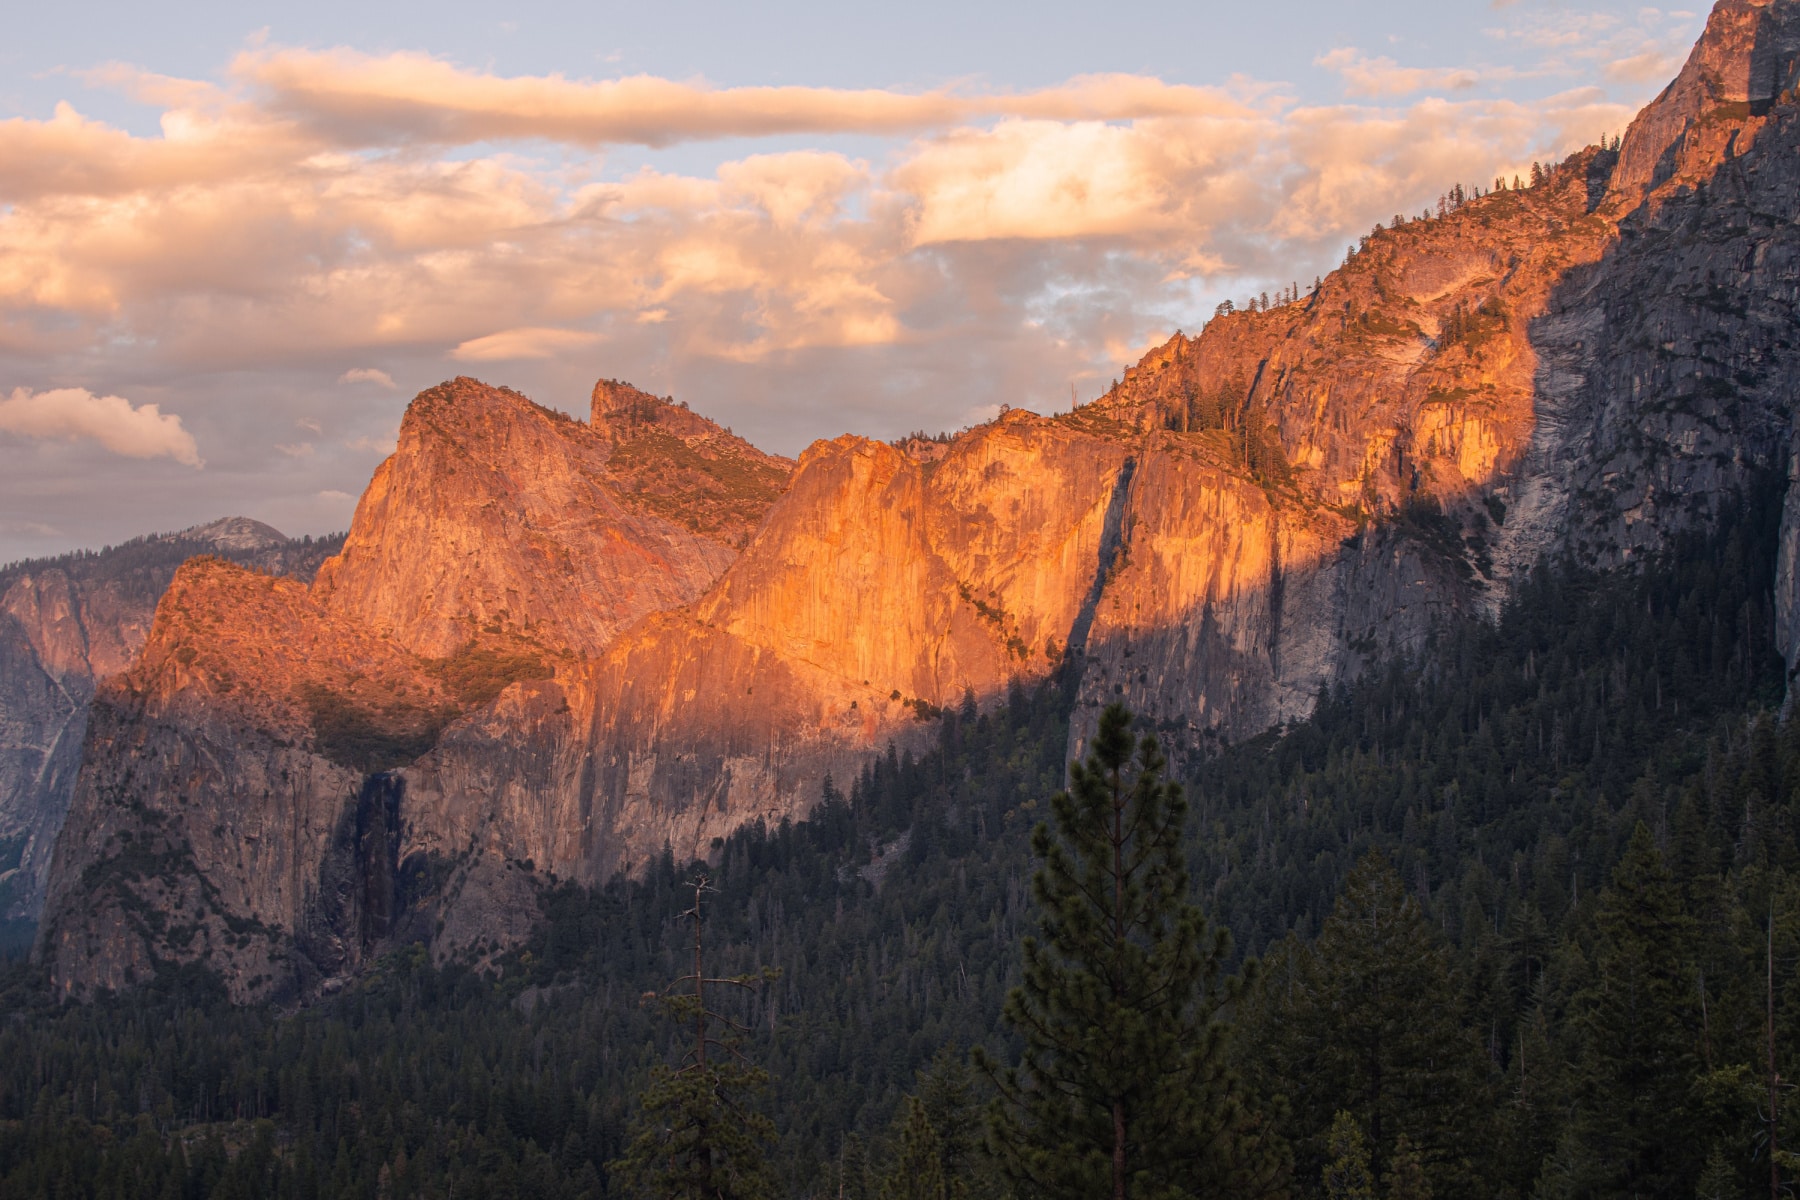 The golden hour sunset on the granite mountains of Yosemite.